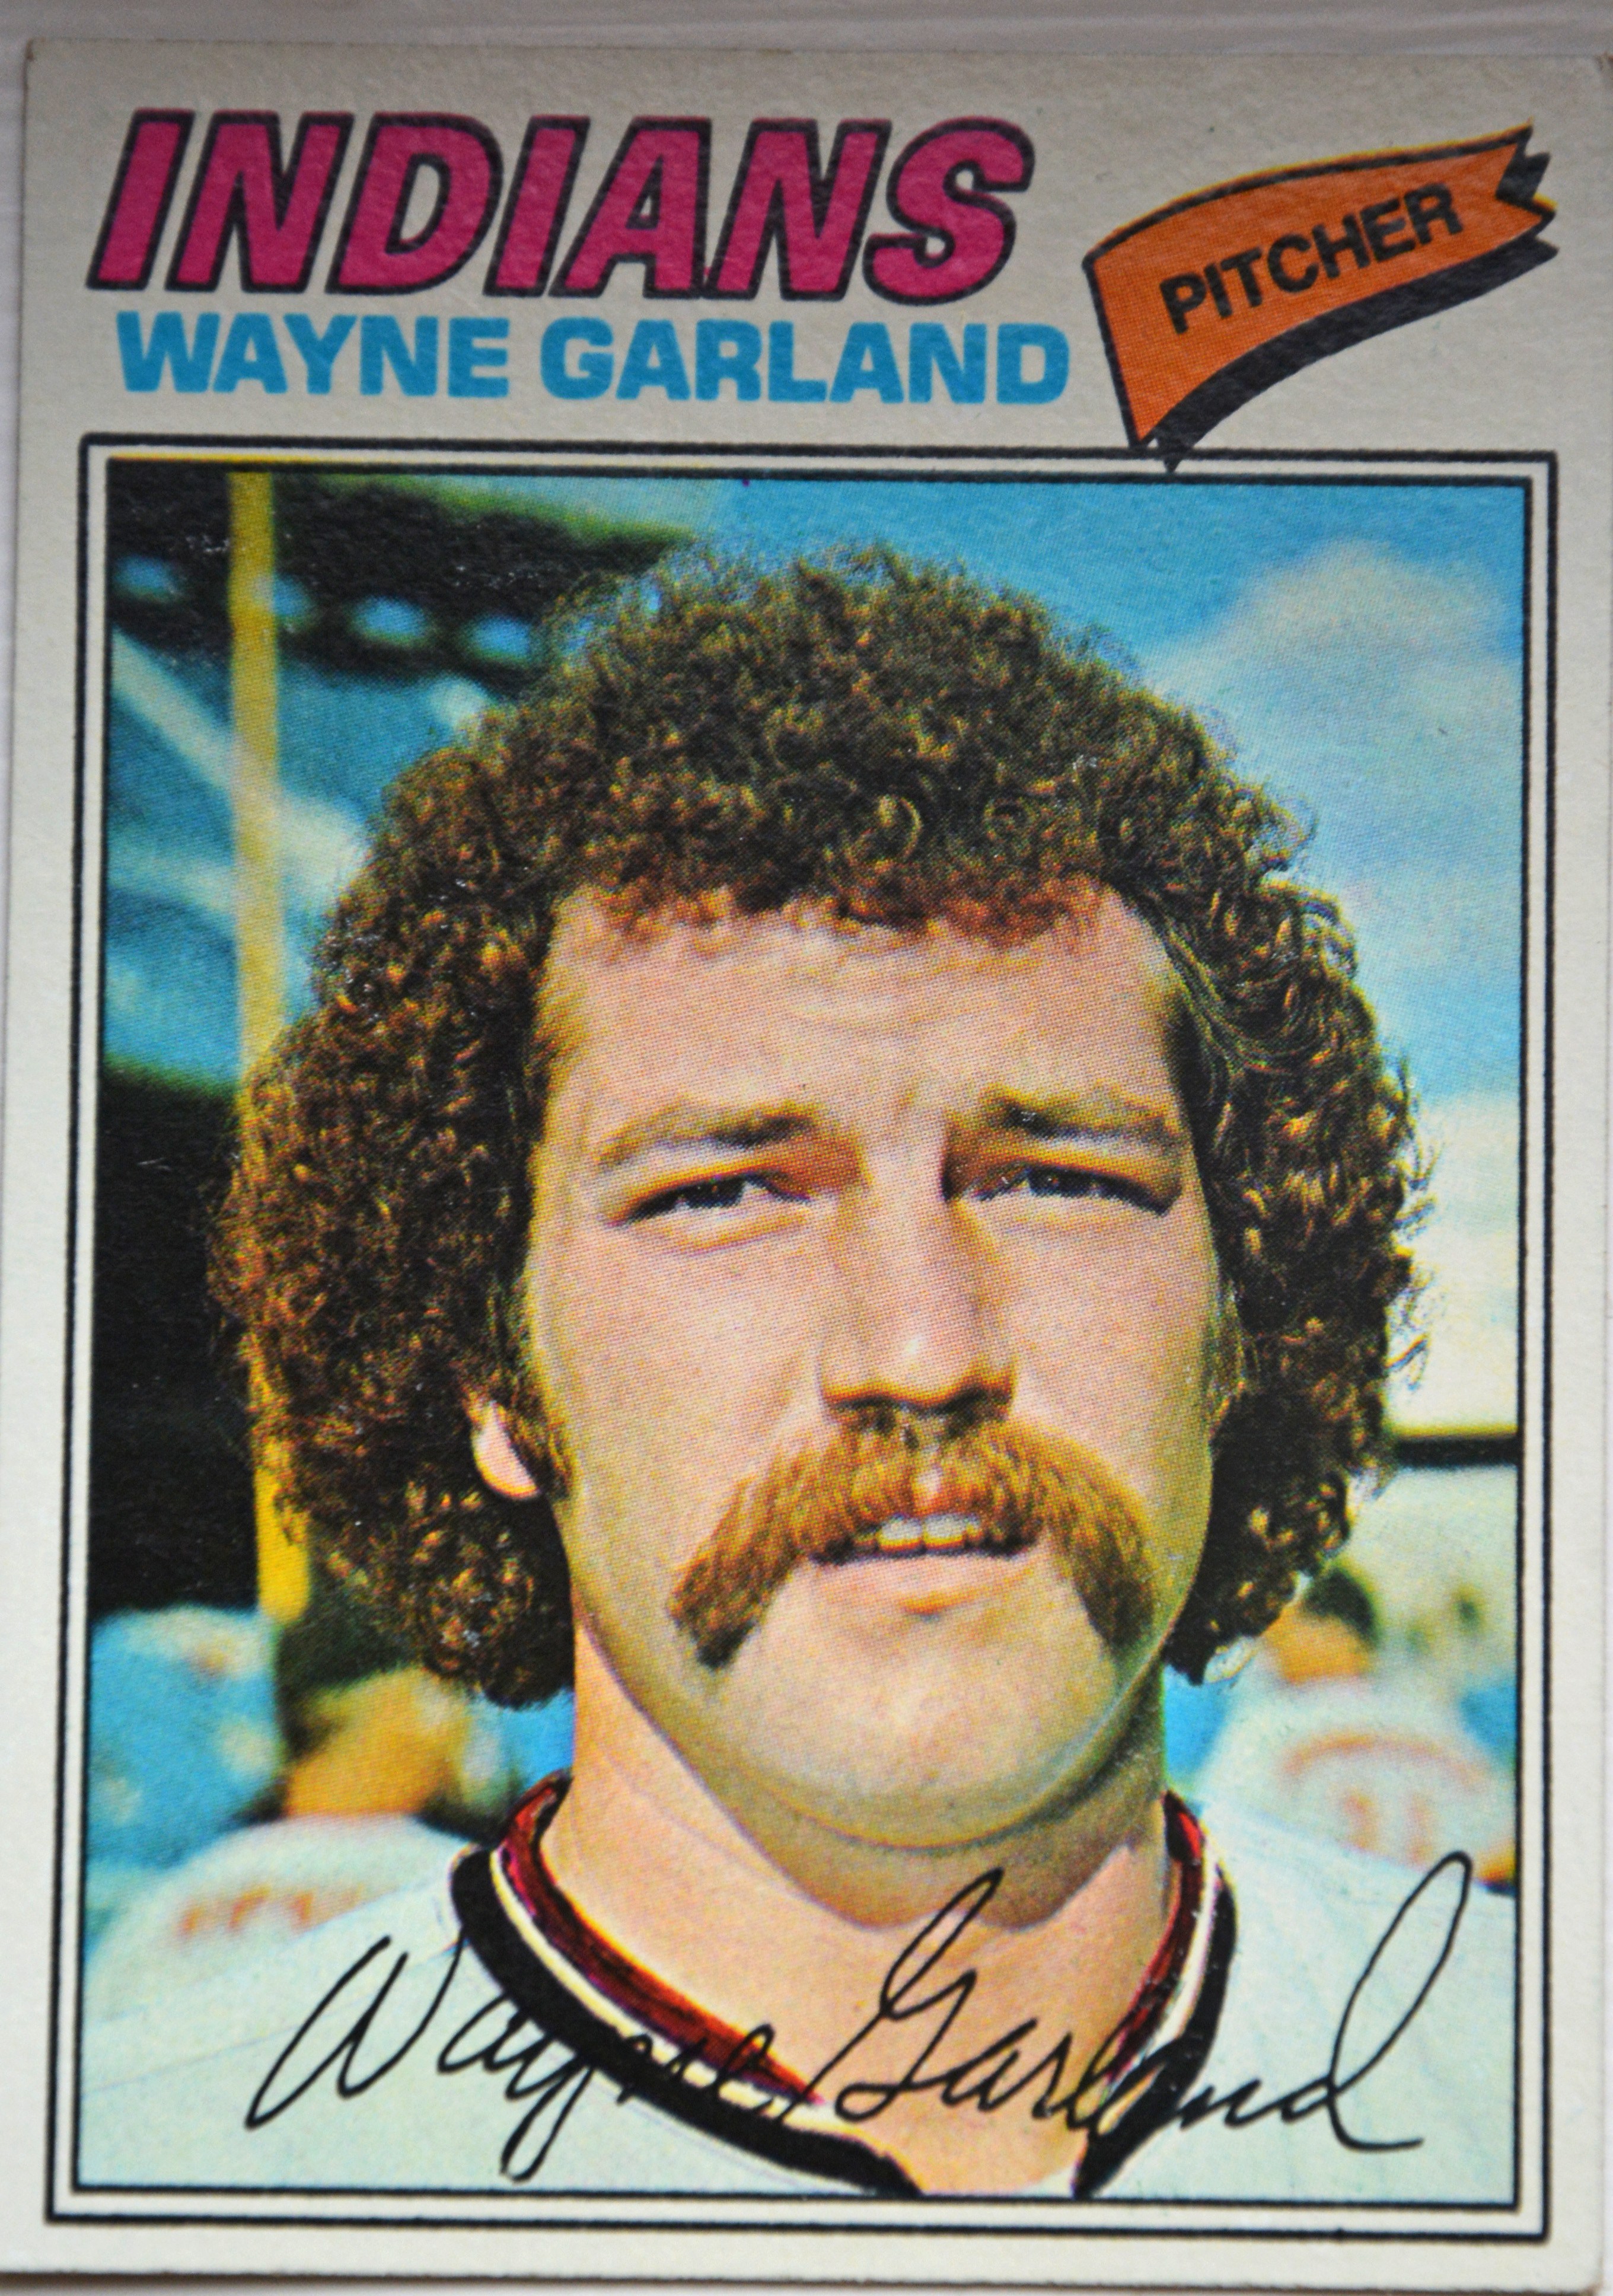 10 Awesome Vintage Baseball Cards That’ll Make You Want To Grow A ’70s Mustache